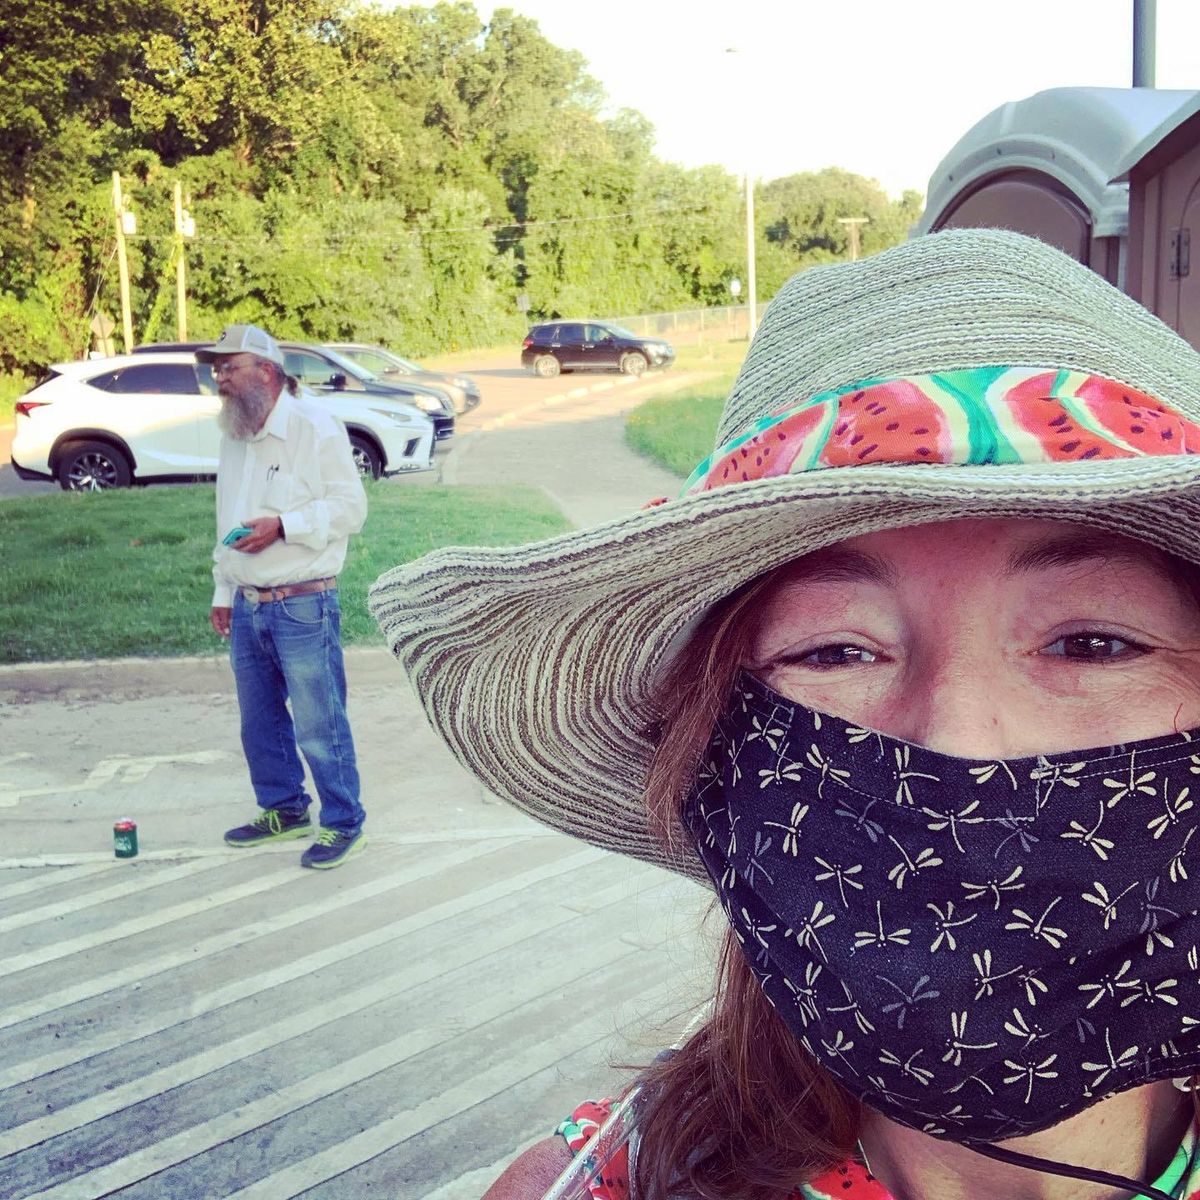 kim mccoy wearing her straw, watermelon themed hat that she made for herself for the race pictured in the background is gary “lazarus lake” cantrell